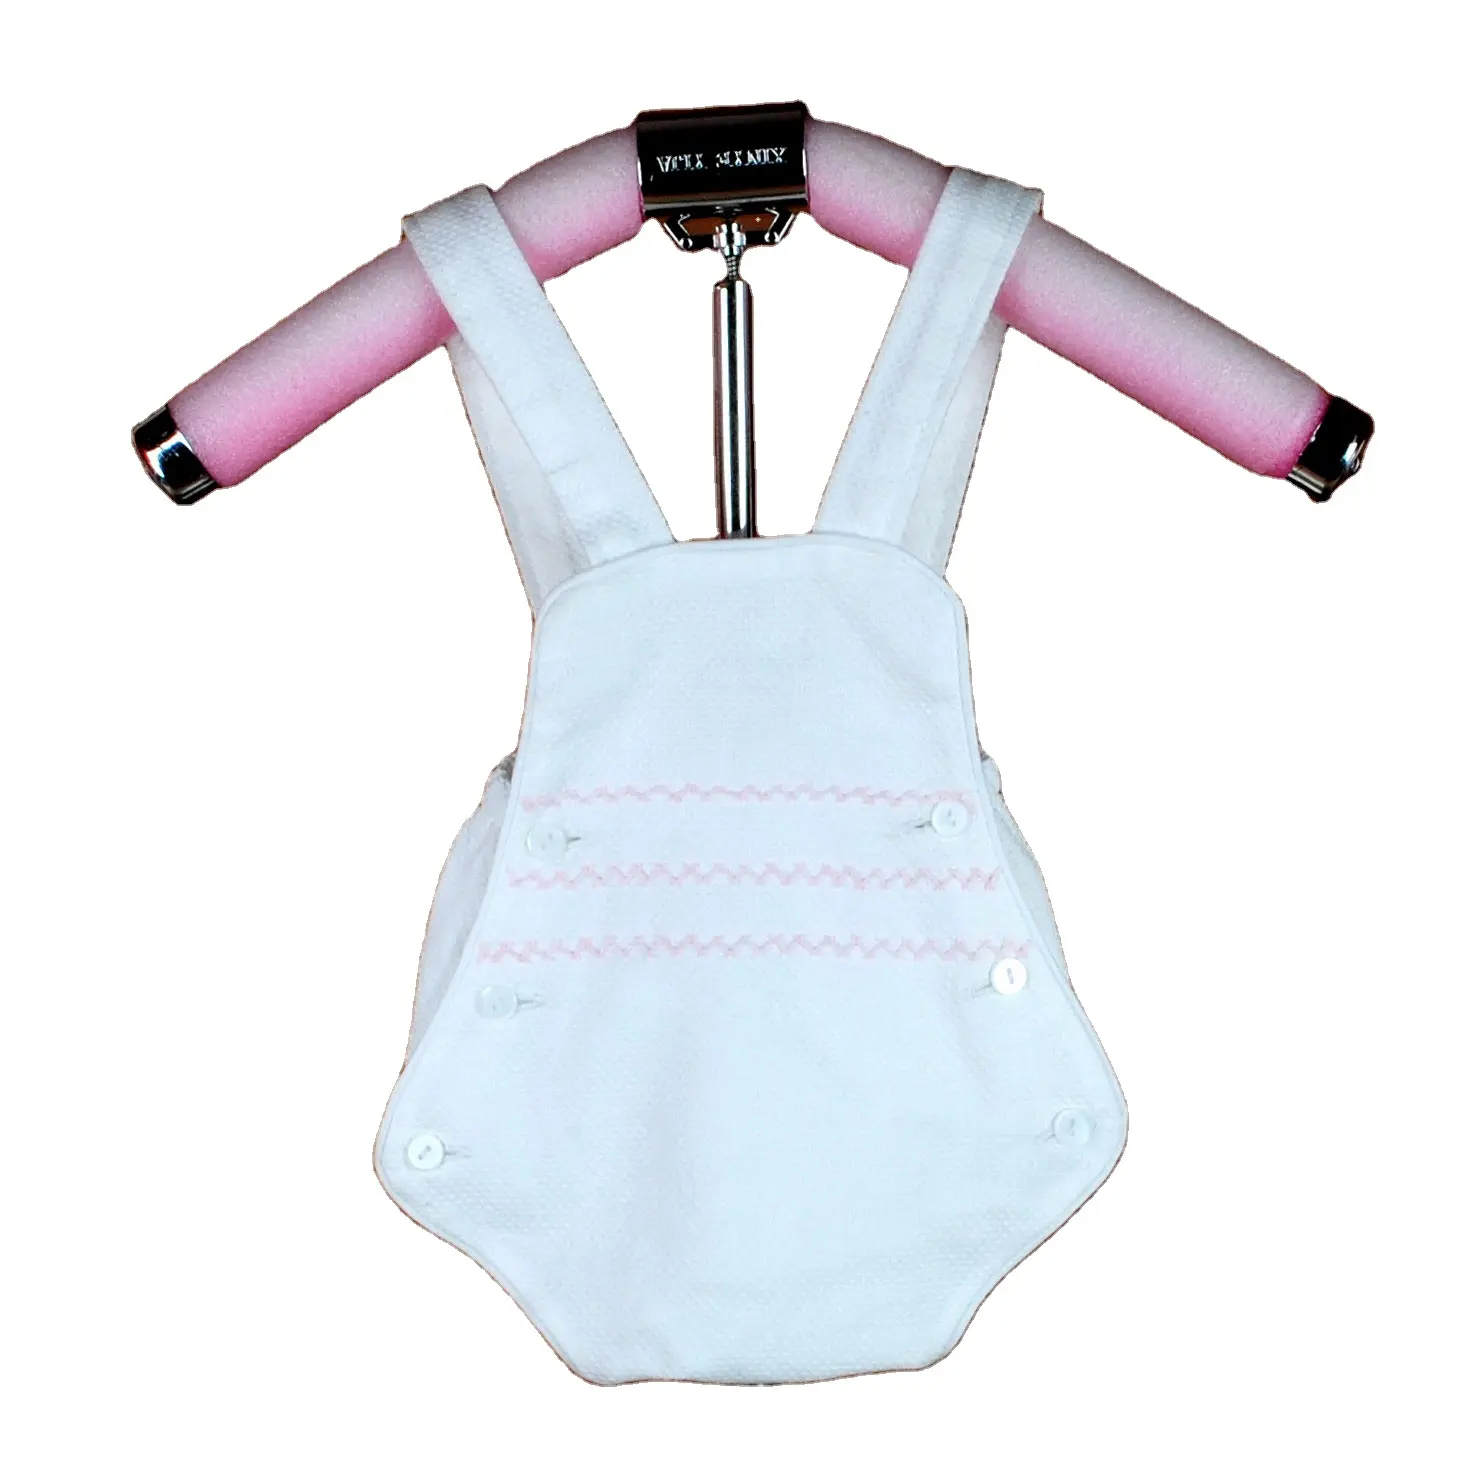 Hot sale Summer Newborn Infant Hand embroidery Romper Clothes Baby Sling Cotton Sleeveless Vest Jumpsuit Clothing For Baby Girls